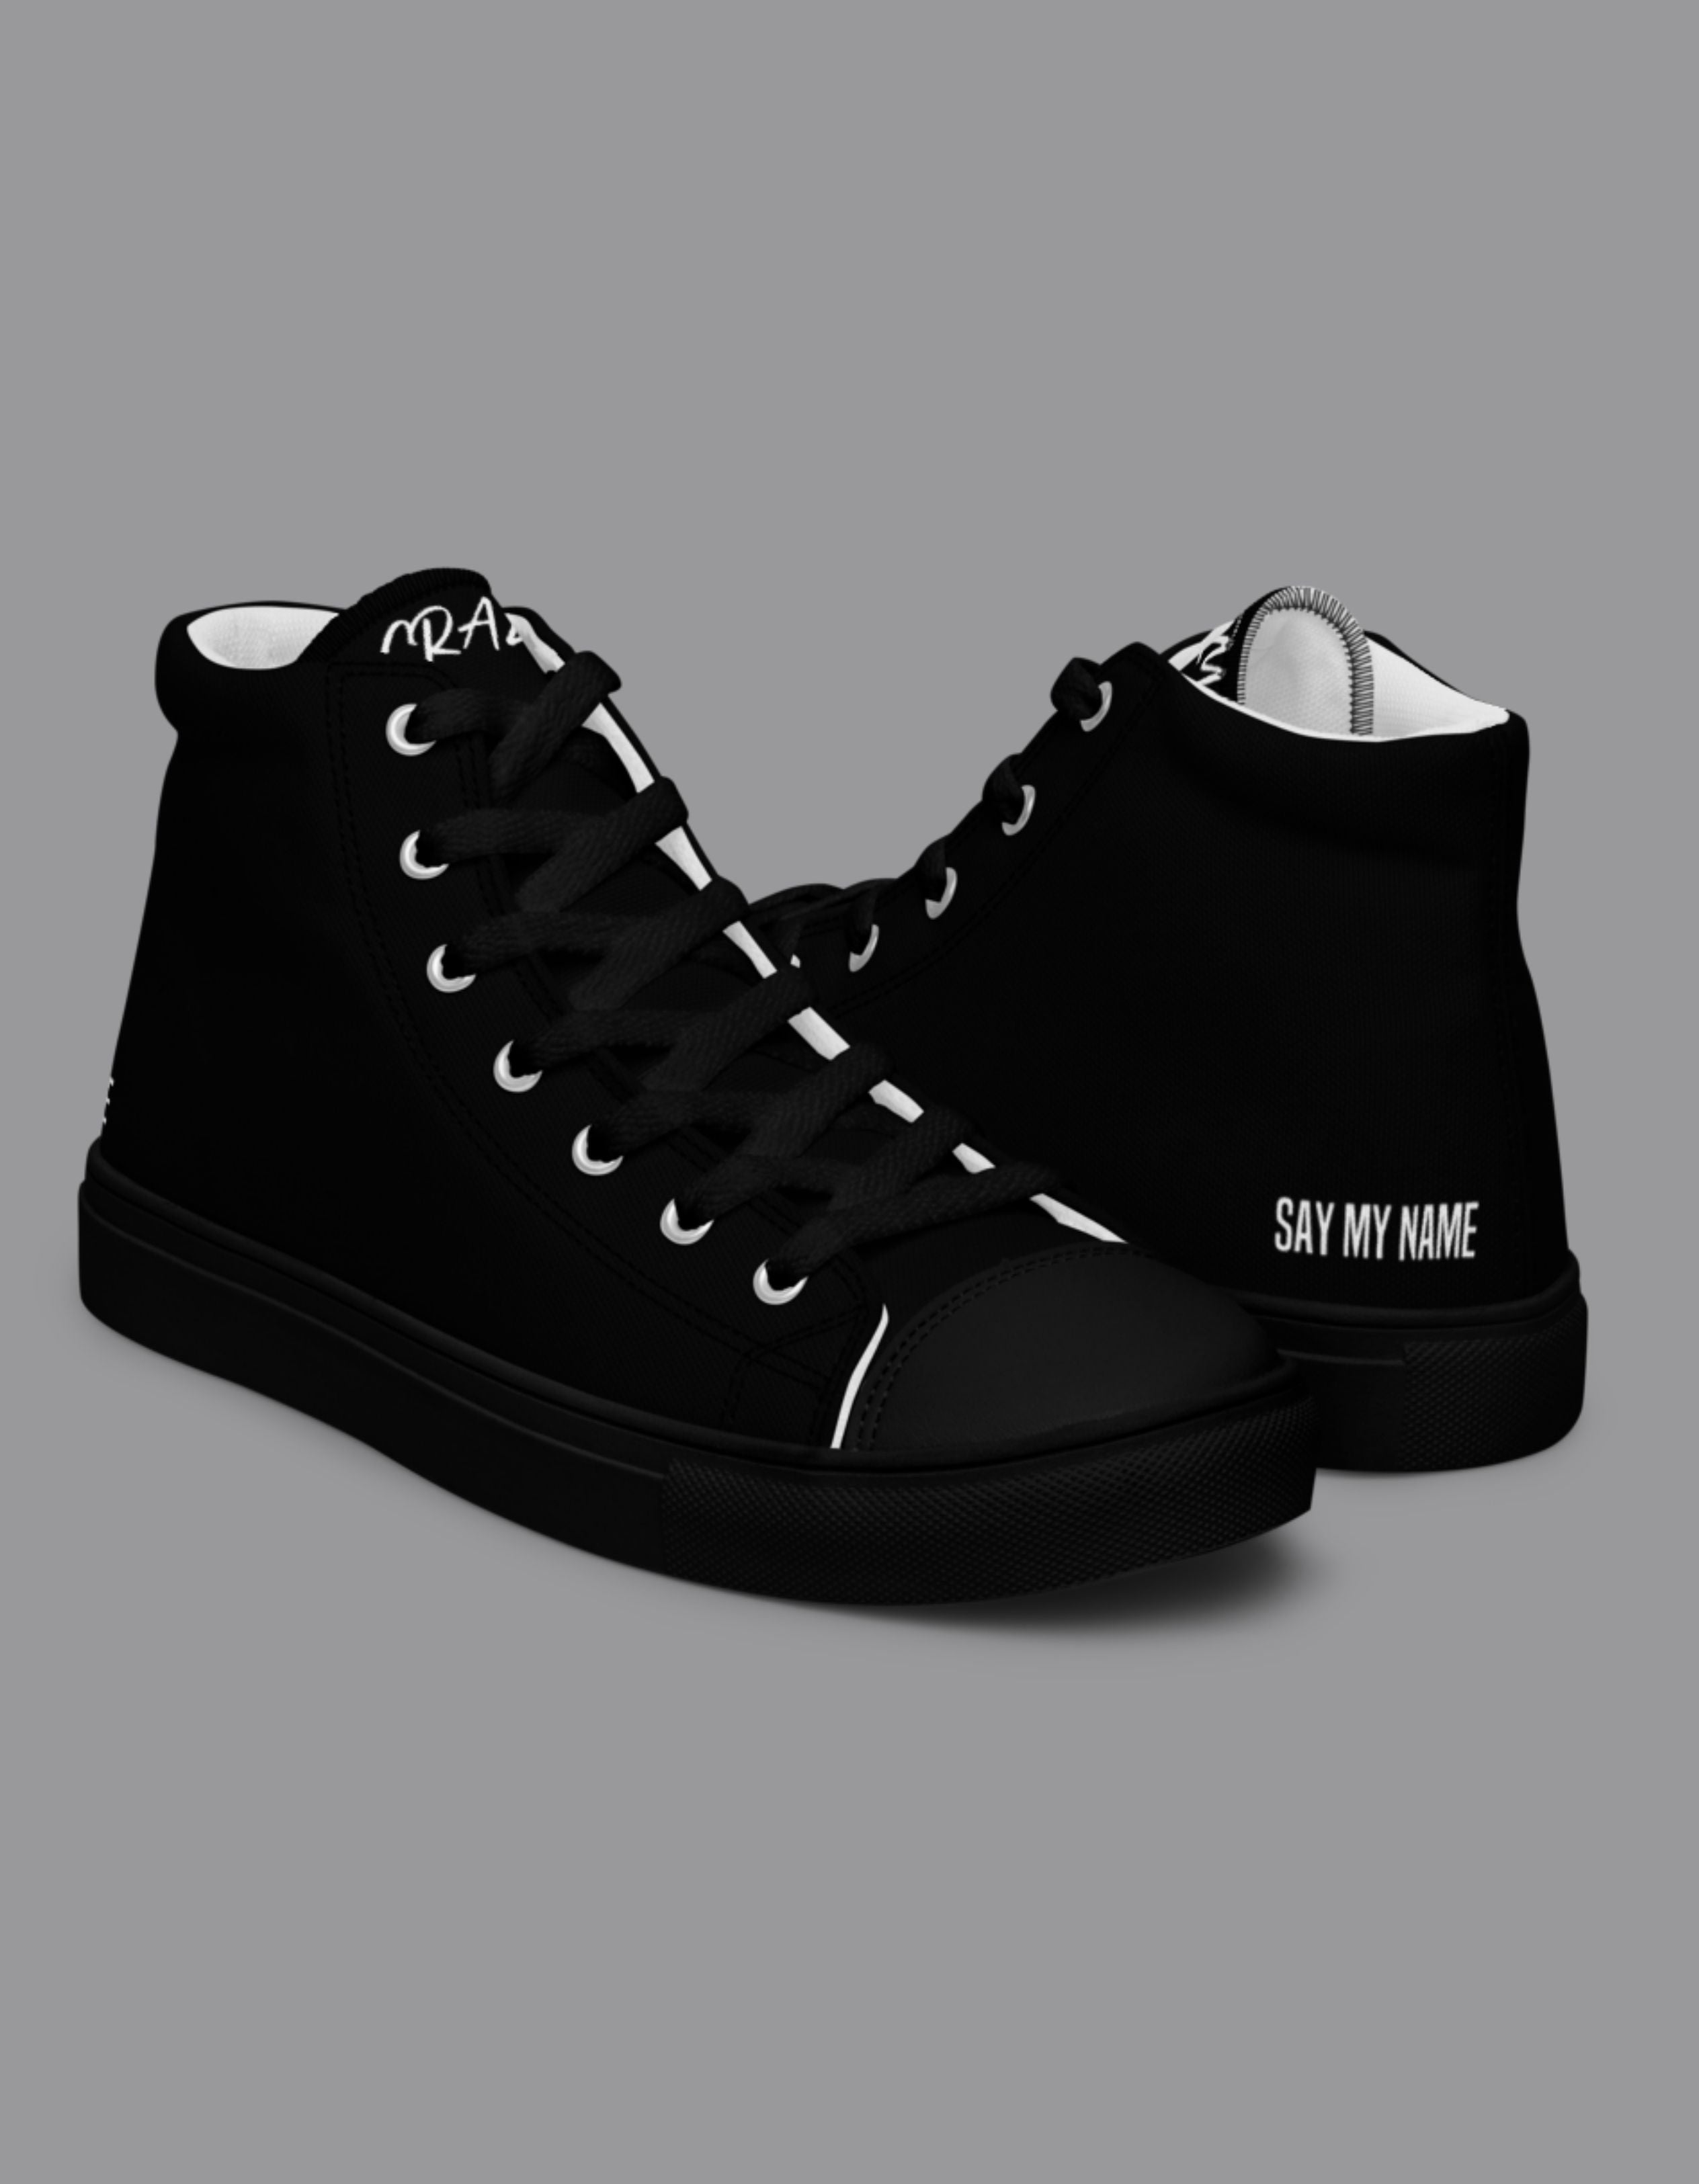 BLACK BLACK "SAY MY NAME" women's high canvas sneakers